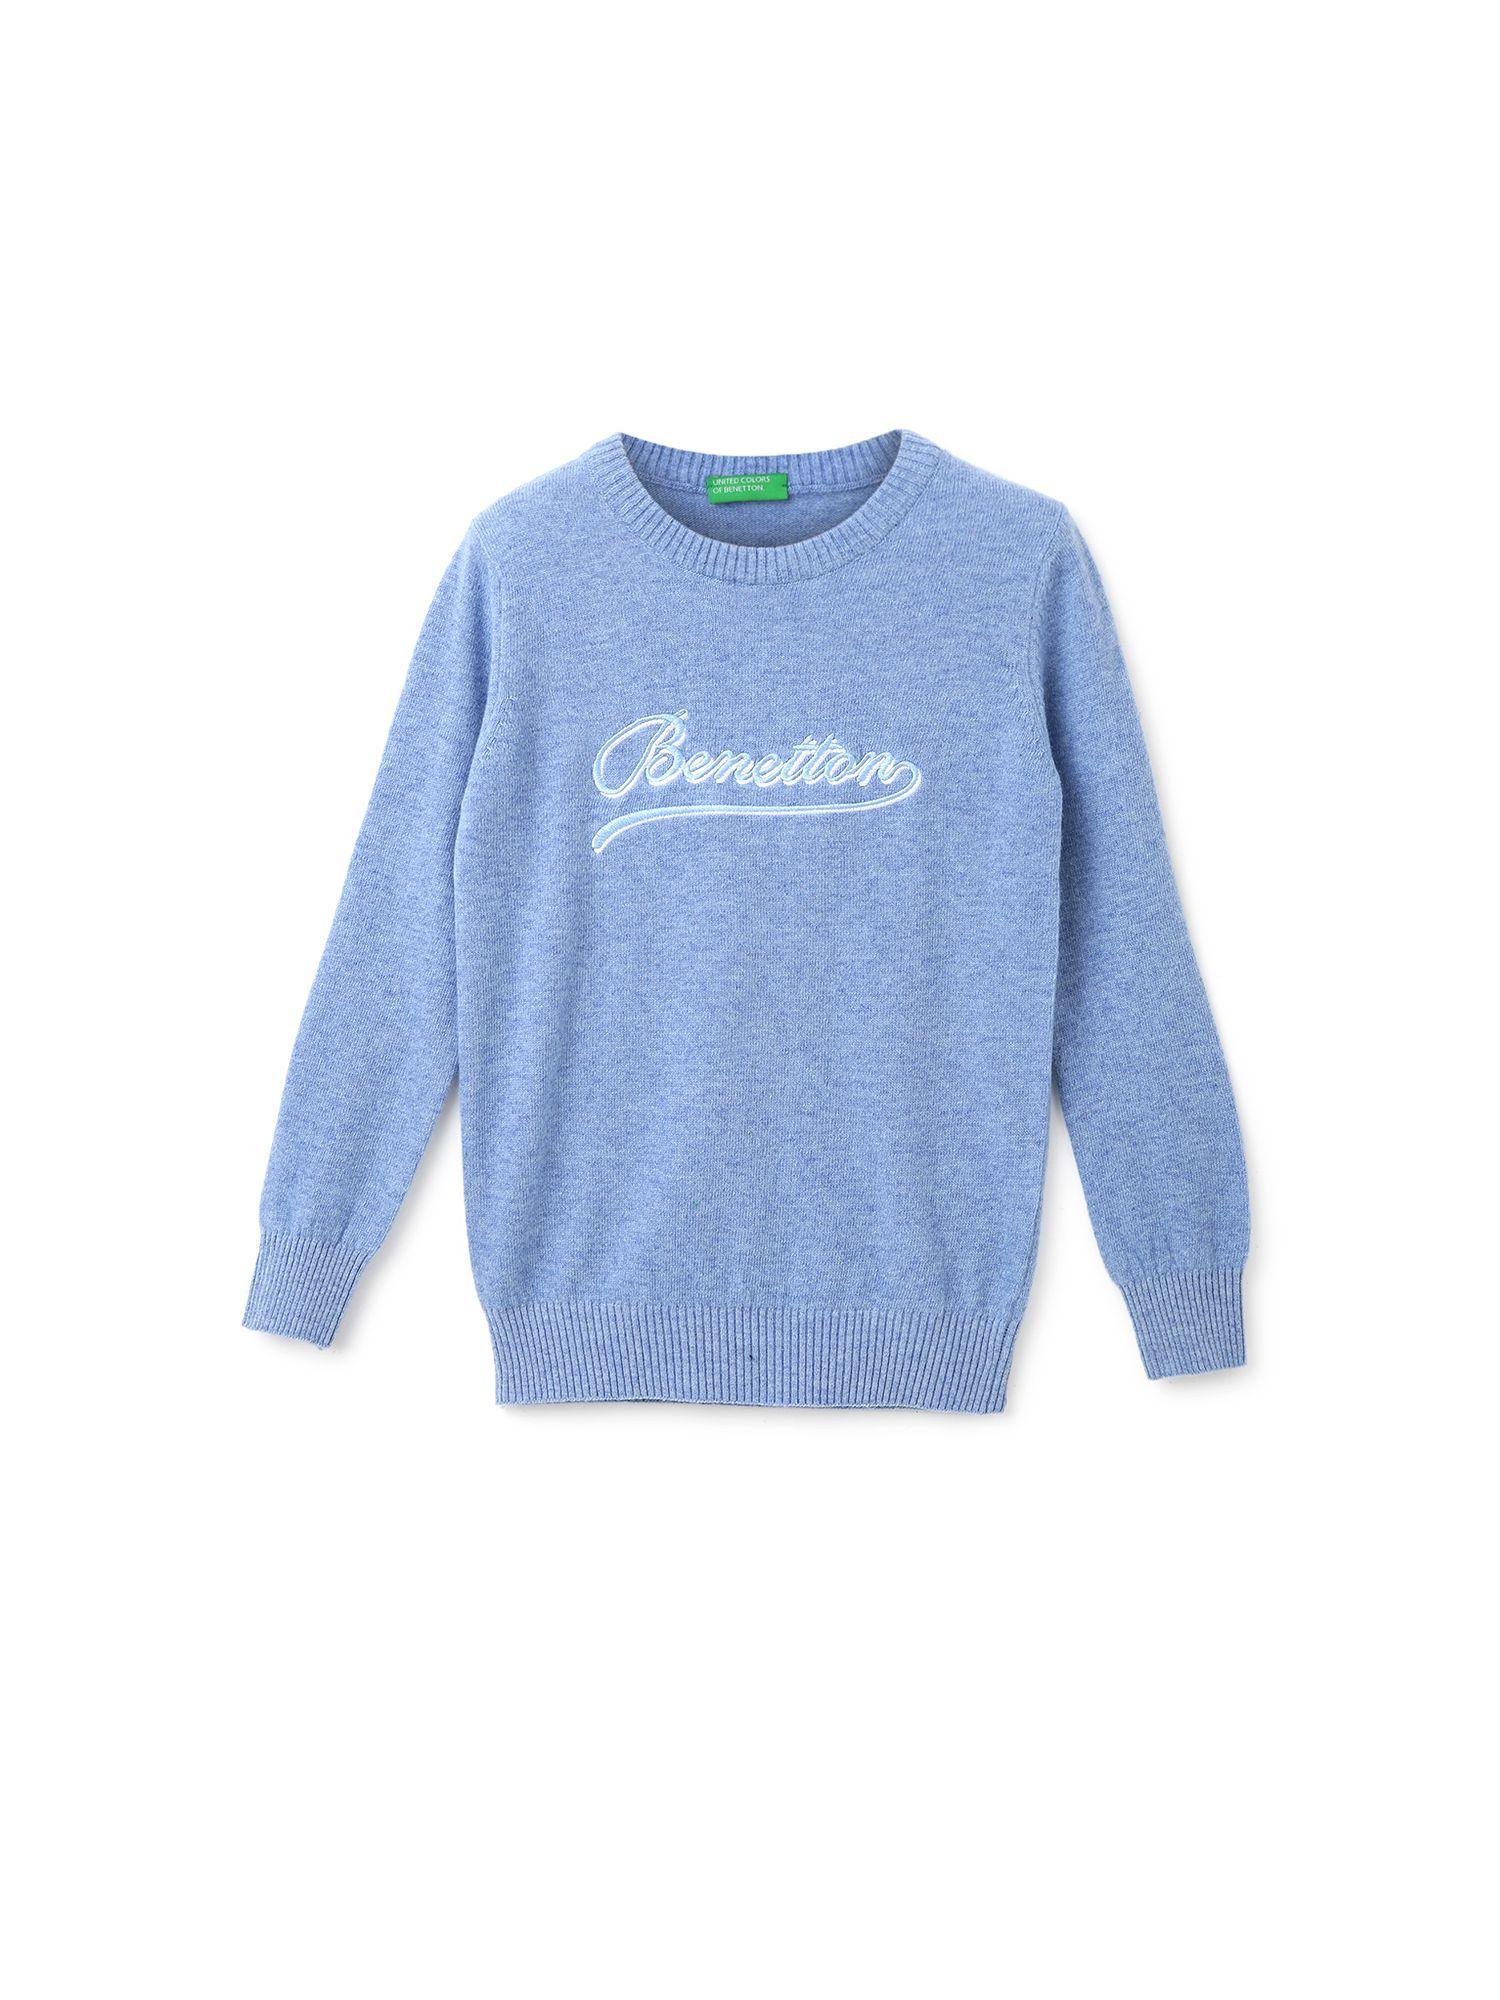 boys blue embroidered logo round neck sweater